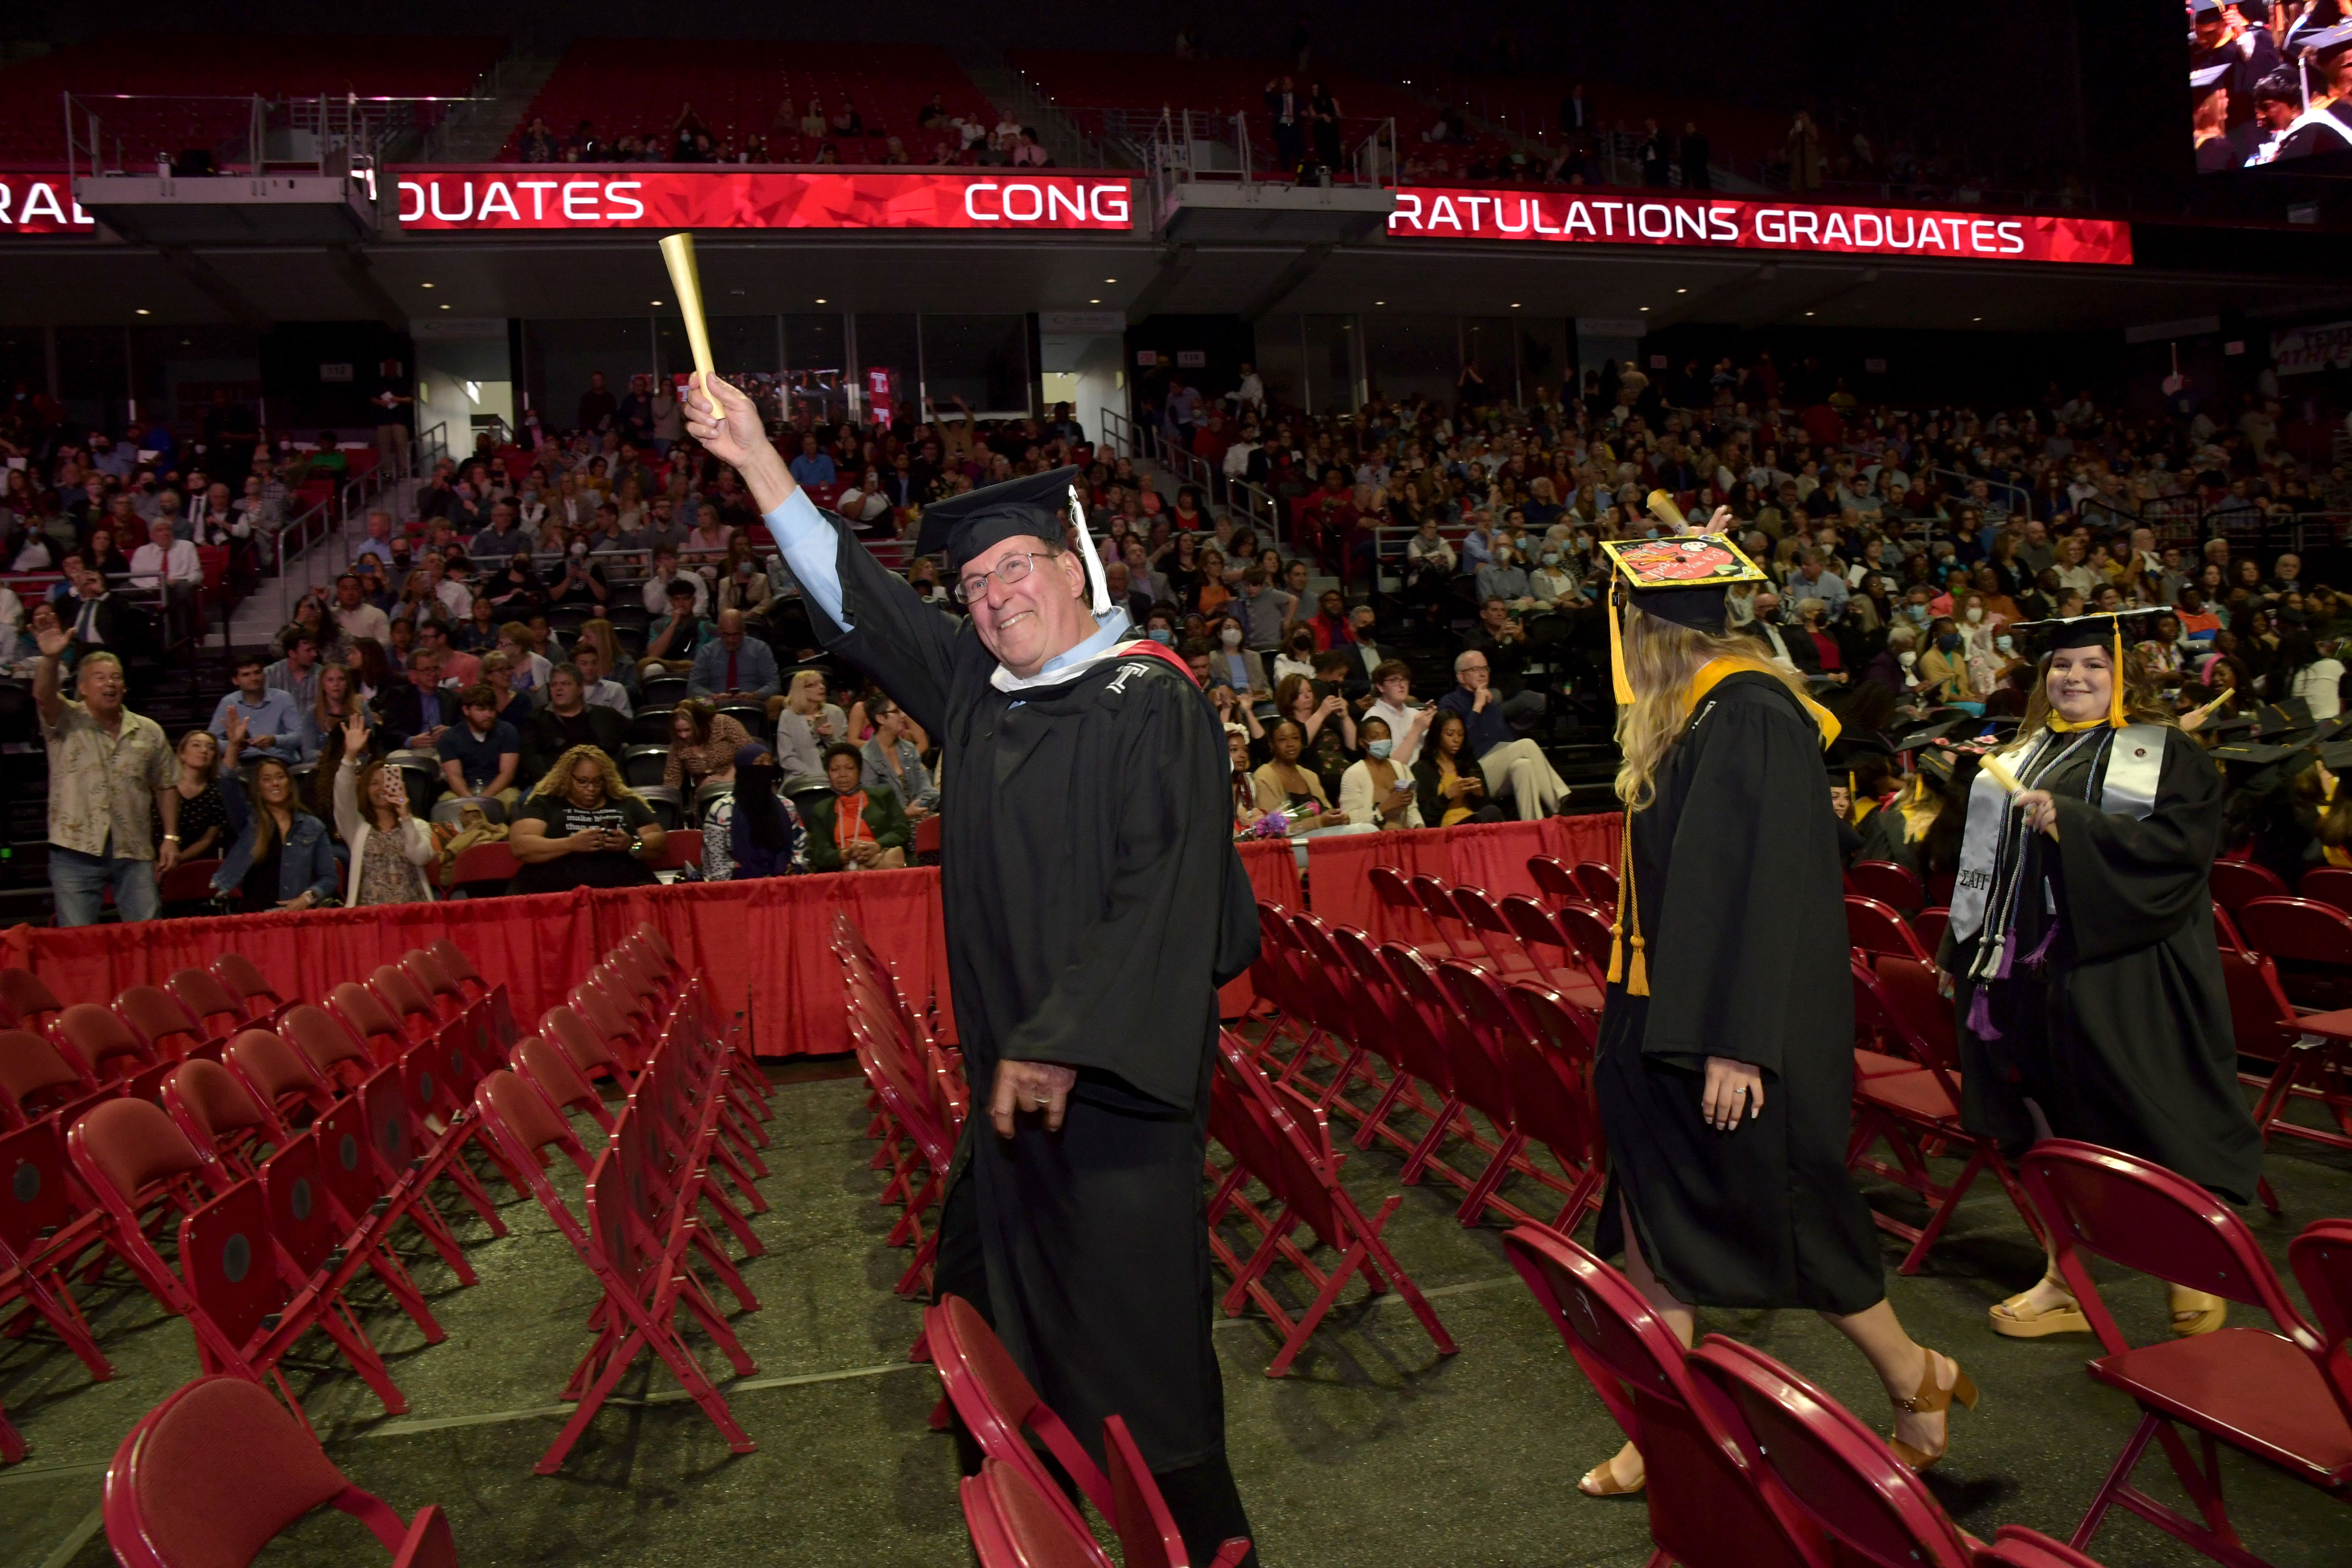 graduate poses with arm raised up holding diploma scroll